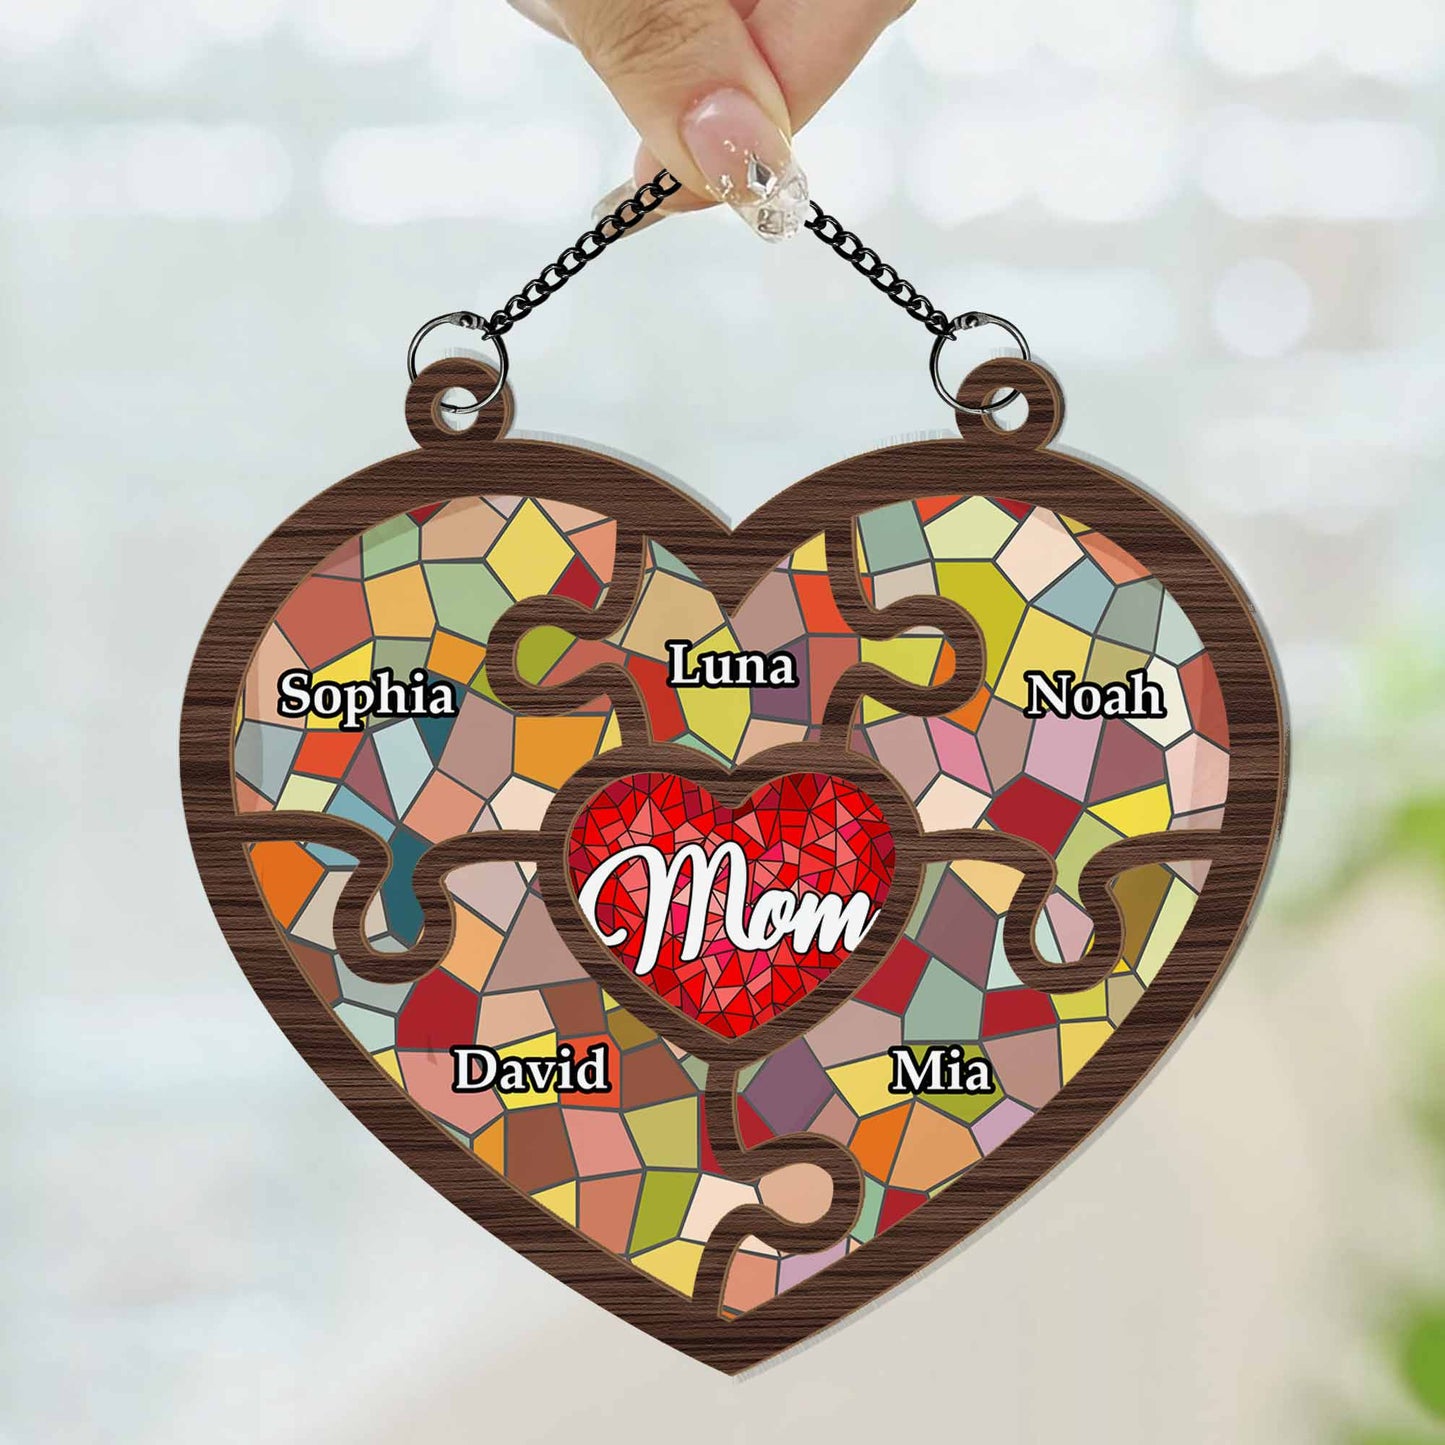 Mom Hold Us All - Personalized Window Hanging Suncatcher Ornament